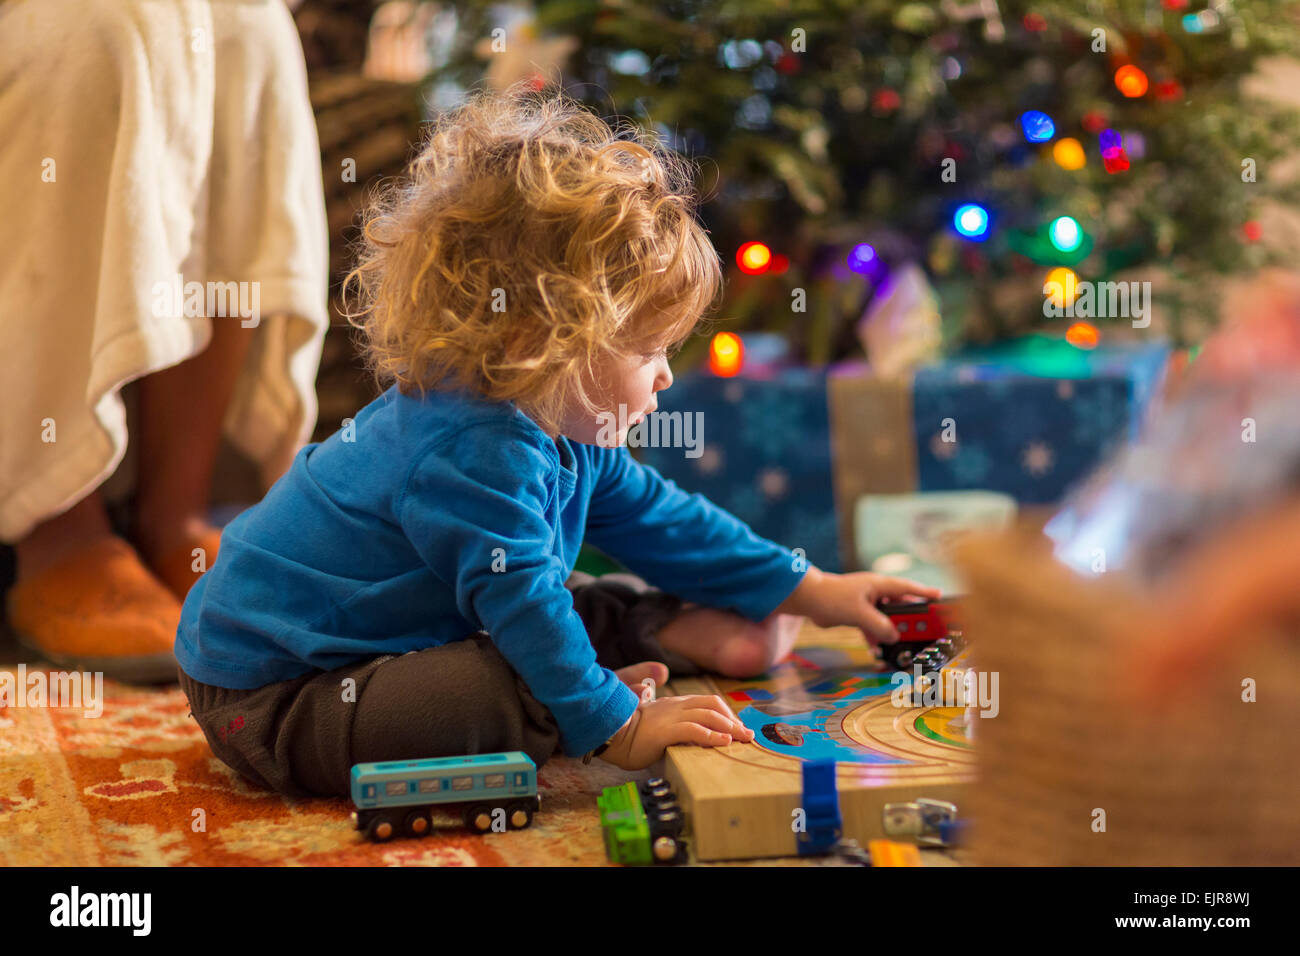 Caucasian baby boy playing with toys under Christmas tree Stock Photo